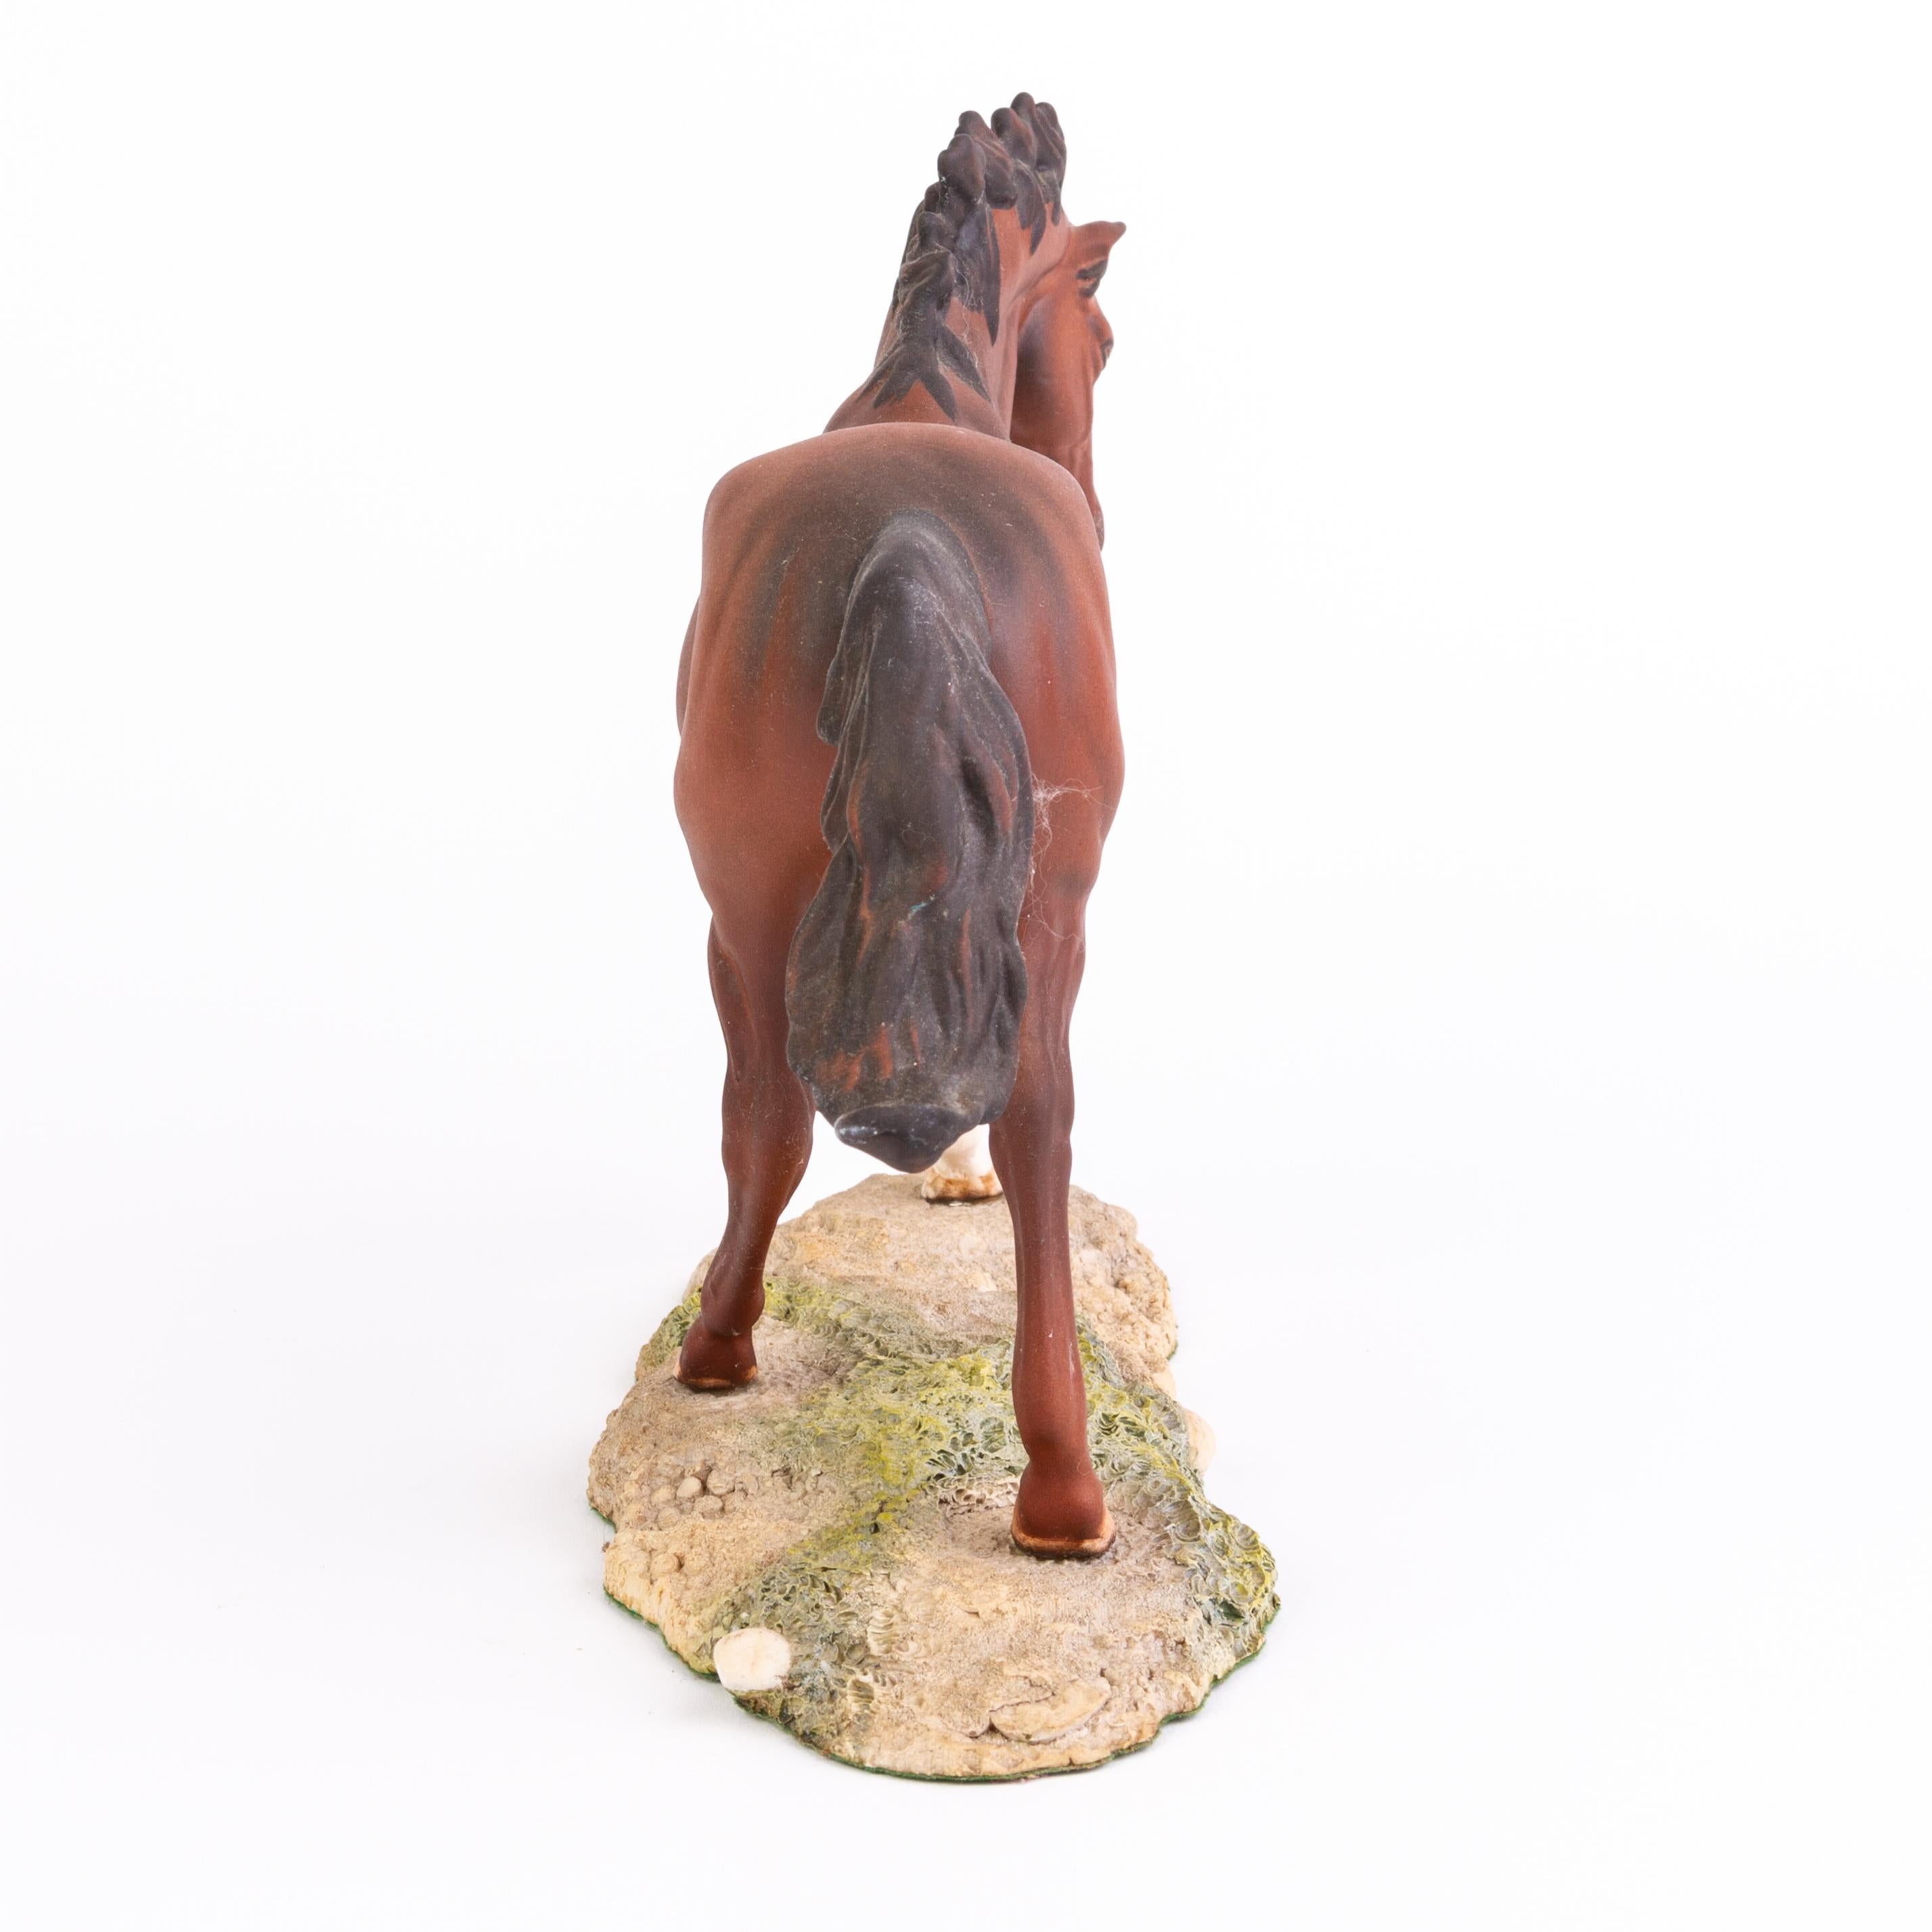 In good condition
From a private collection
Free international shipping
Royal Doulton Hand Painted Porcelain Horse Sculpture 